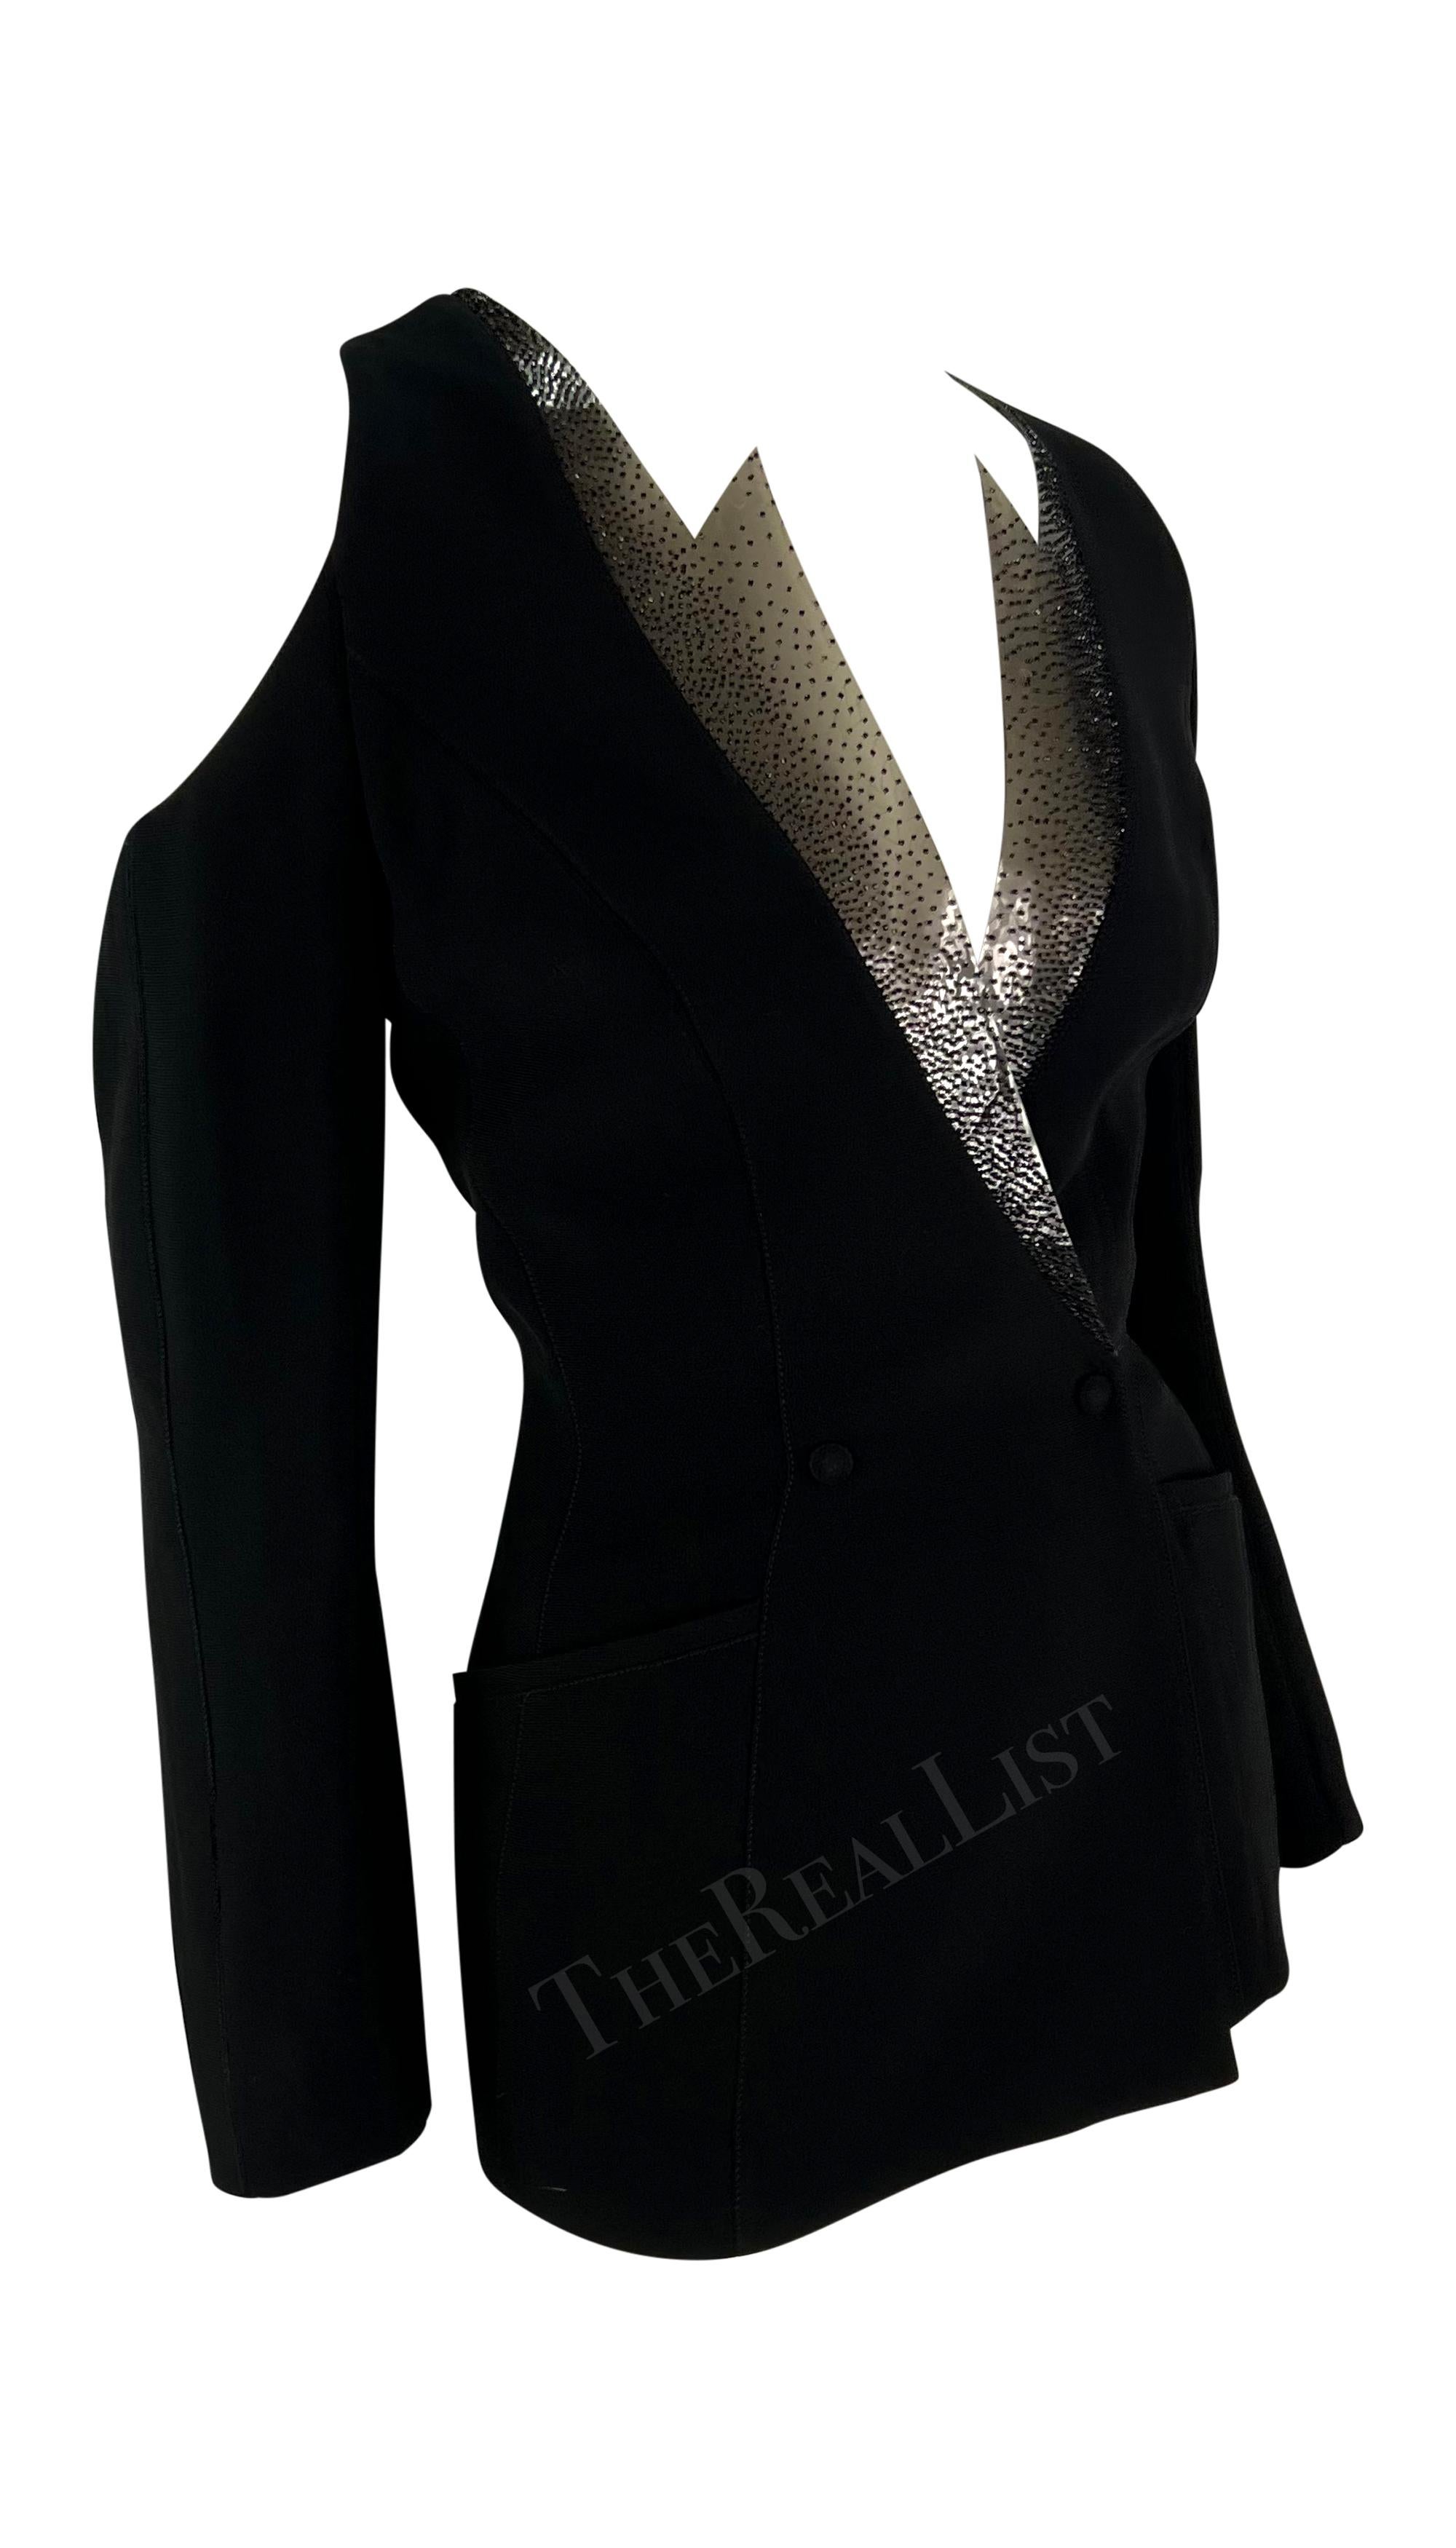 S/S 2001 Thierry Mugler Runway Beaded PVC Cutout Black Plunging Blazer For Sale 6